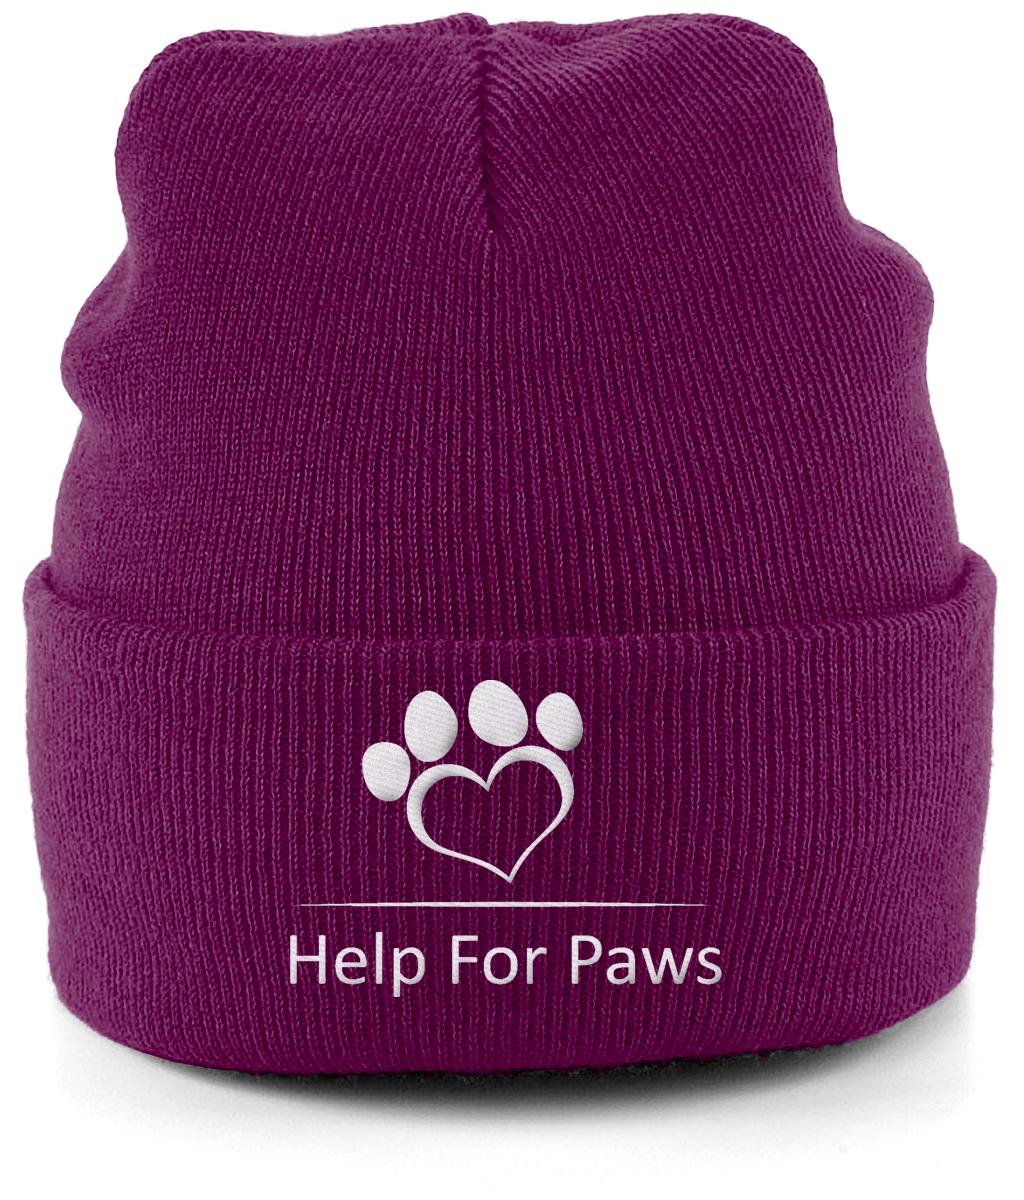 Clothing - Help For Paws Beanie Woolly Hat